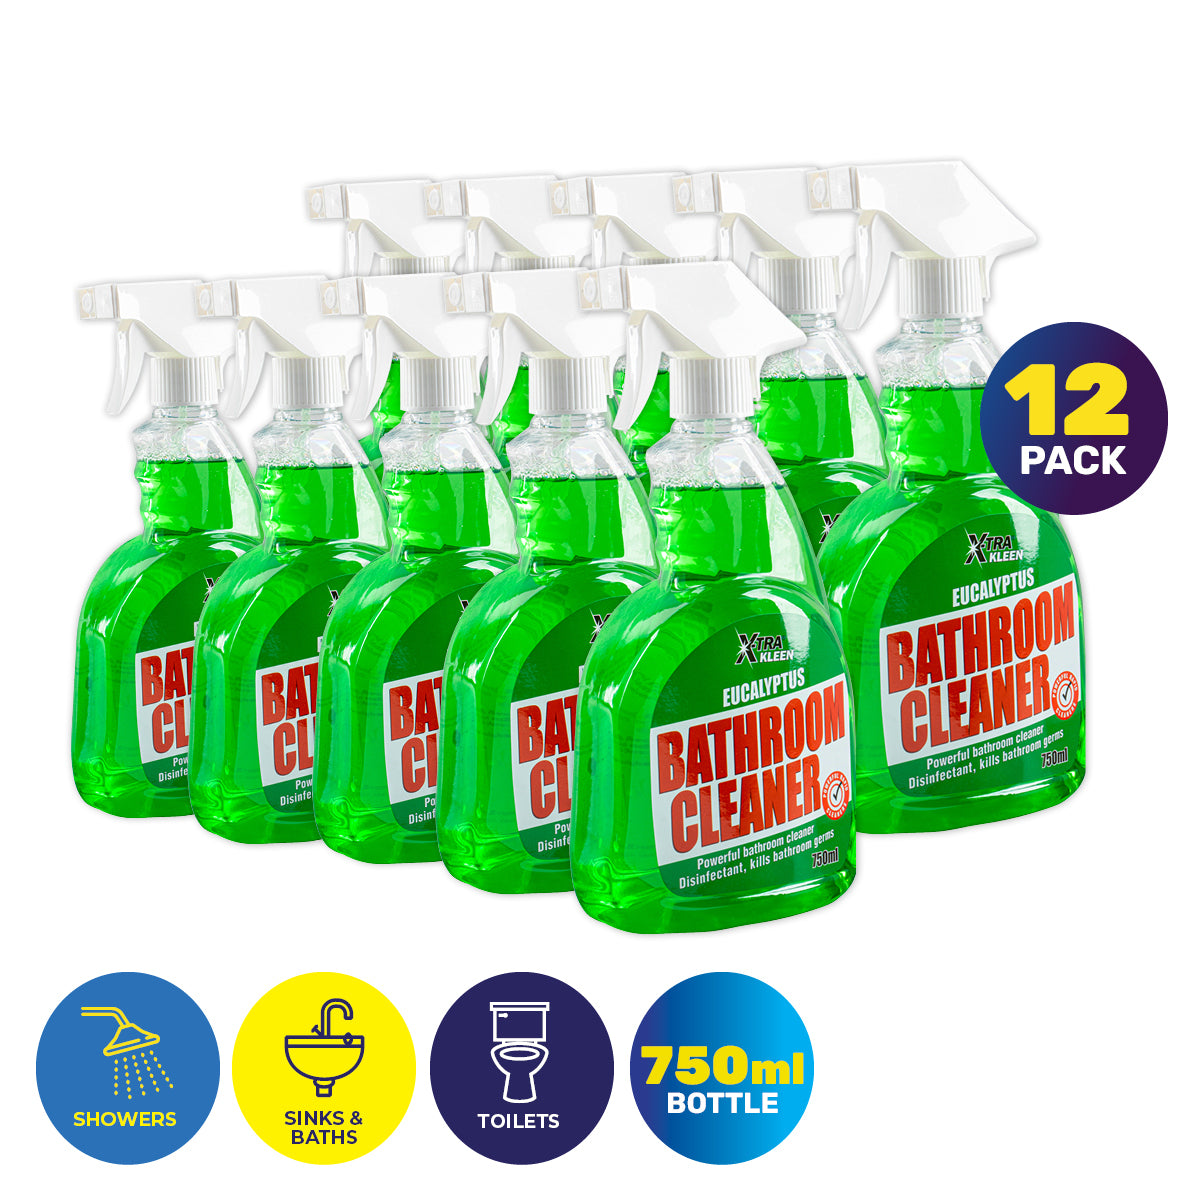 Xtra Kleen 12PCE Bathroom Anti-Bacterial Cleaner Powerful Disinfectant 750ml